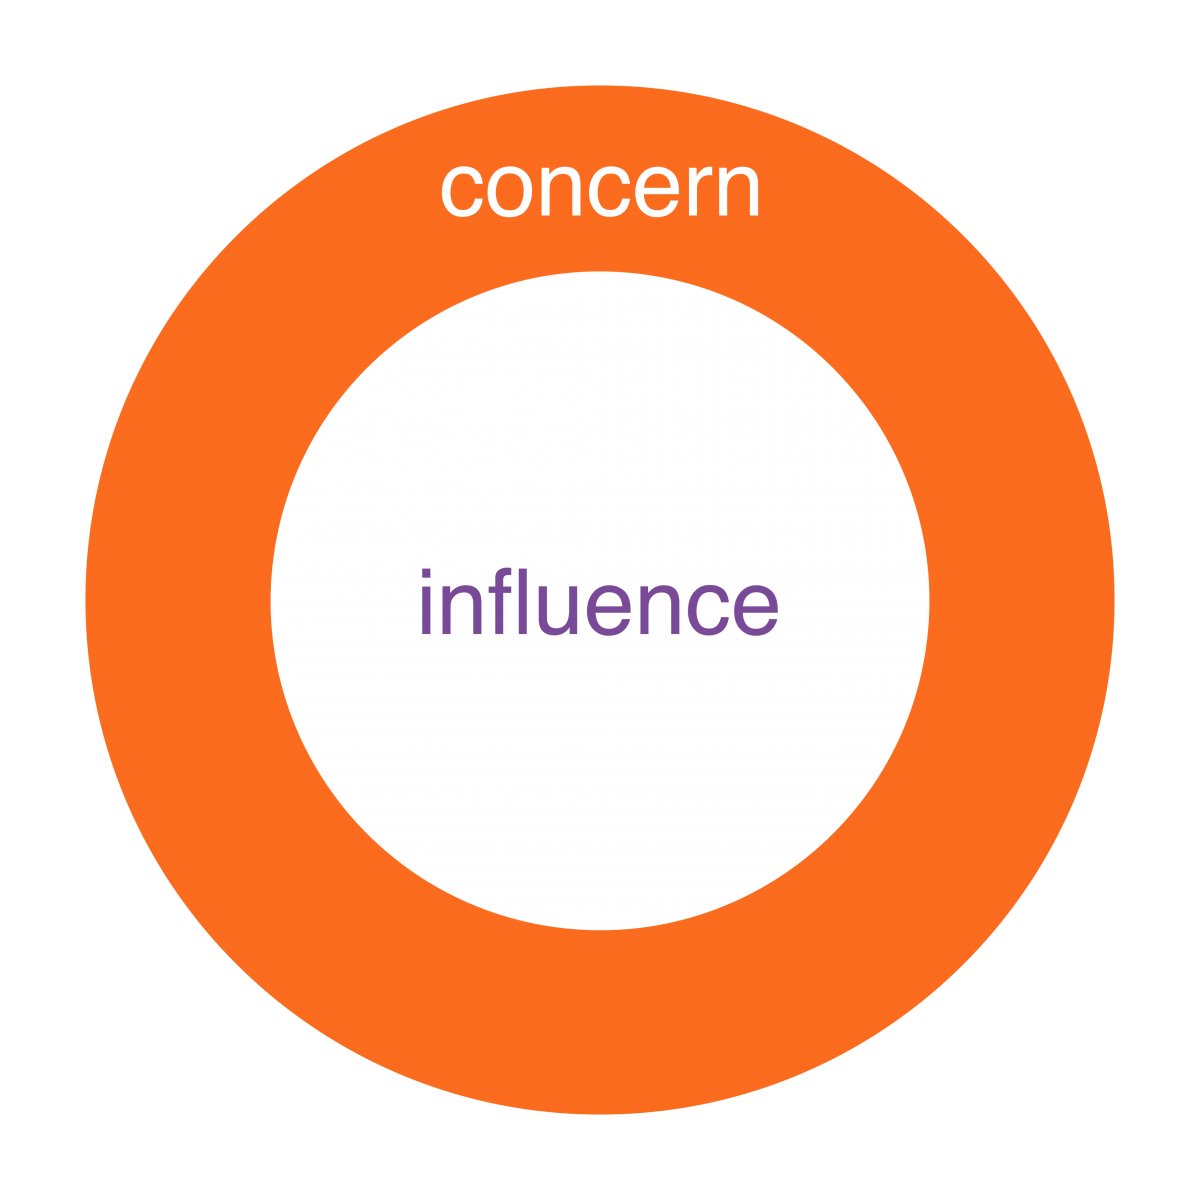 inner circle of influence and outer circle of concern